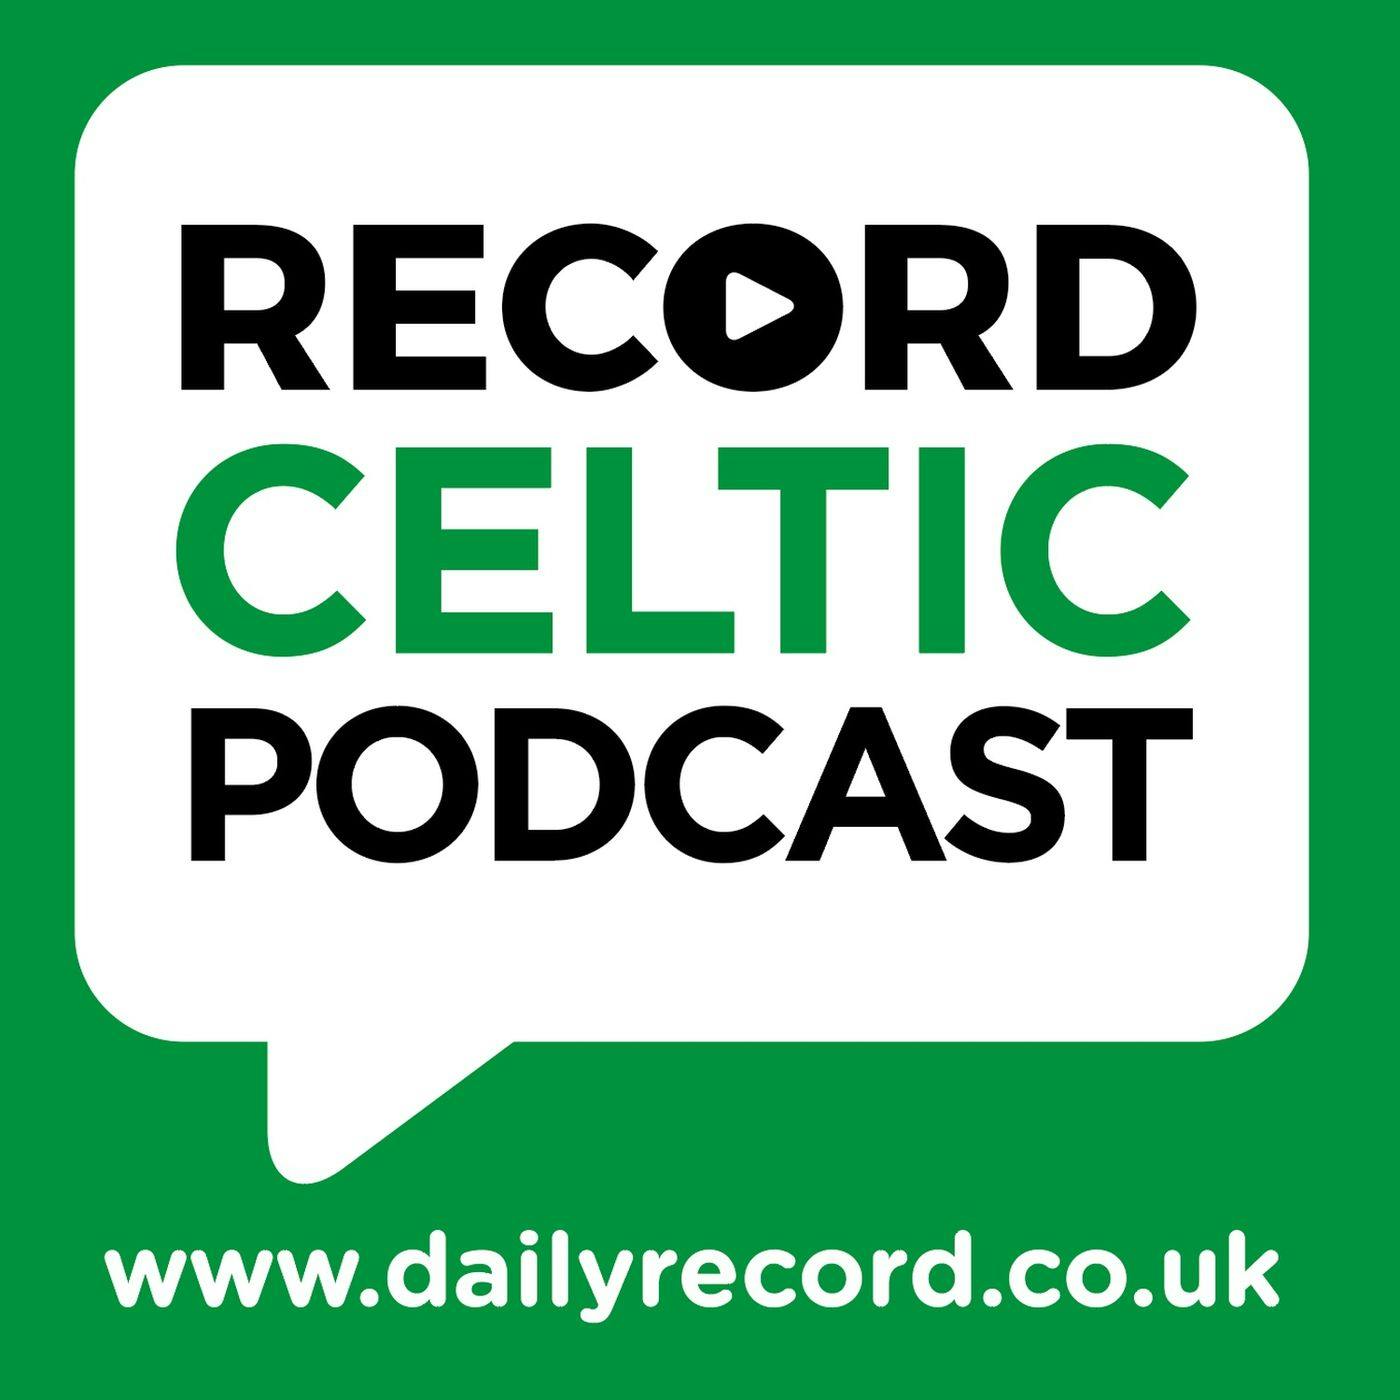 Kennedy’s comments were delusional | Edouard owes Celtic fans at Ibrox | Howe right to play waiting game